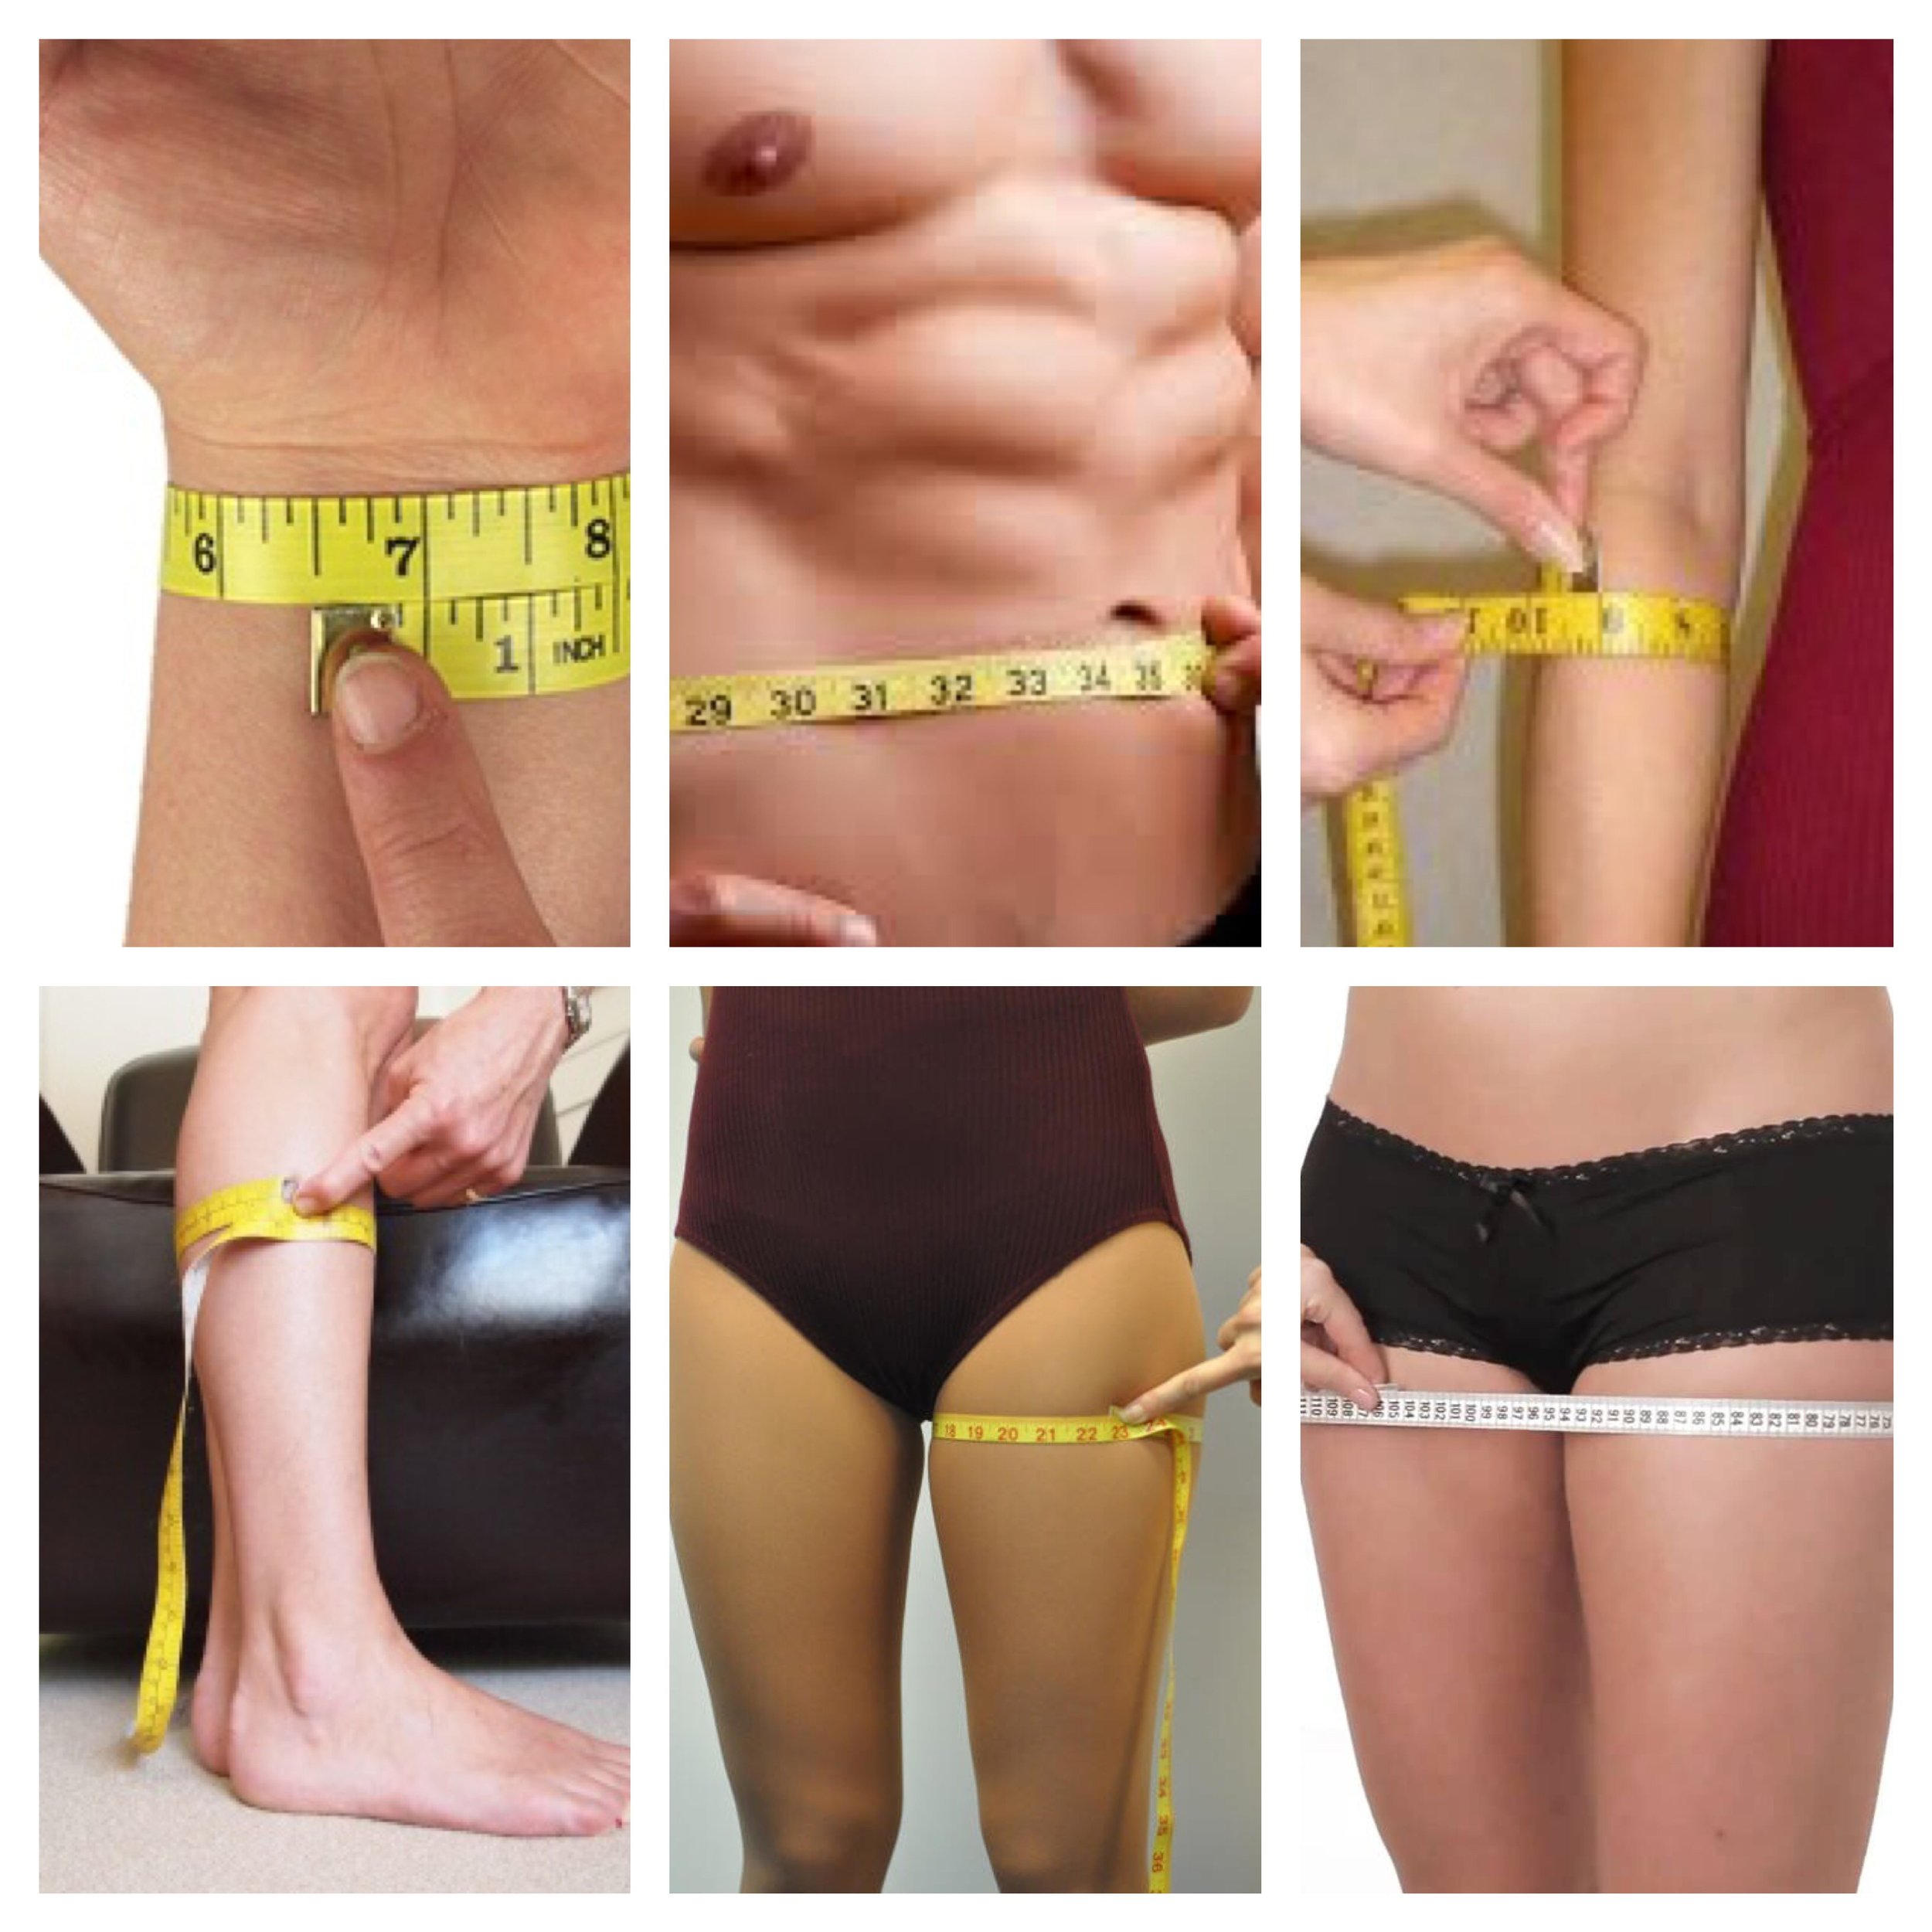 How to Measure Body Fat: 4 Methods to Try